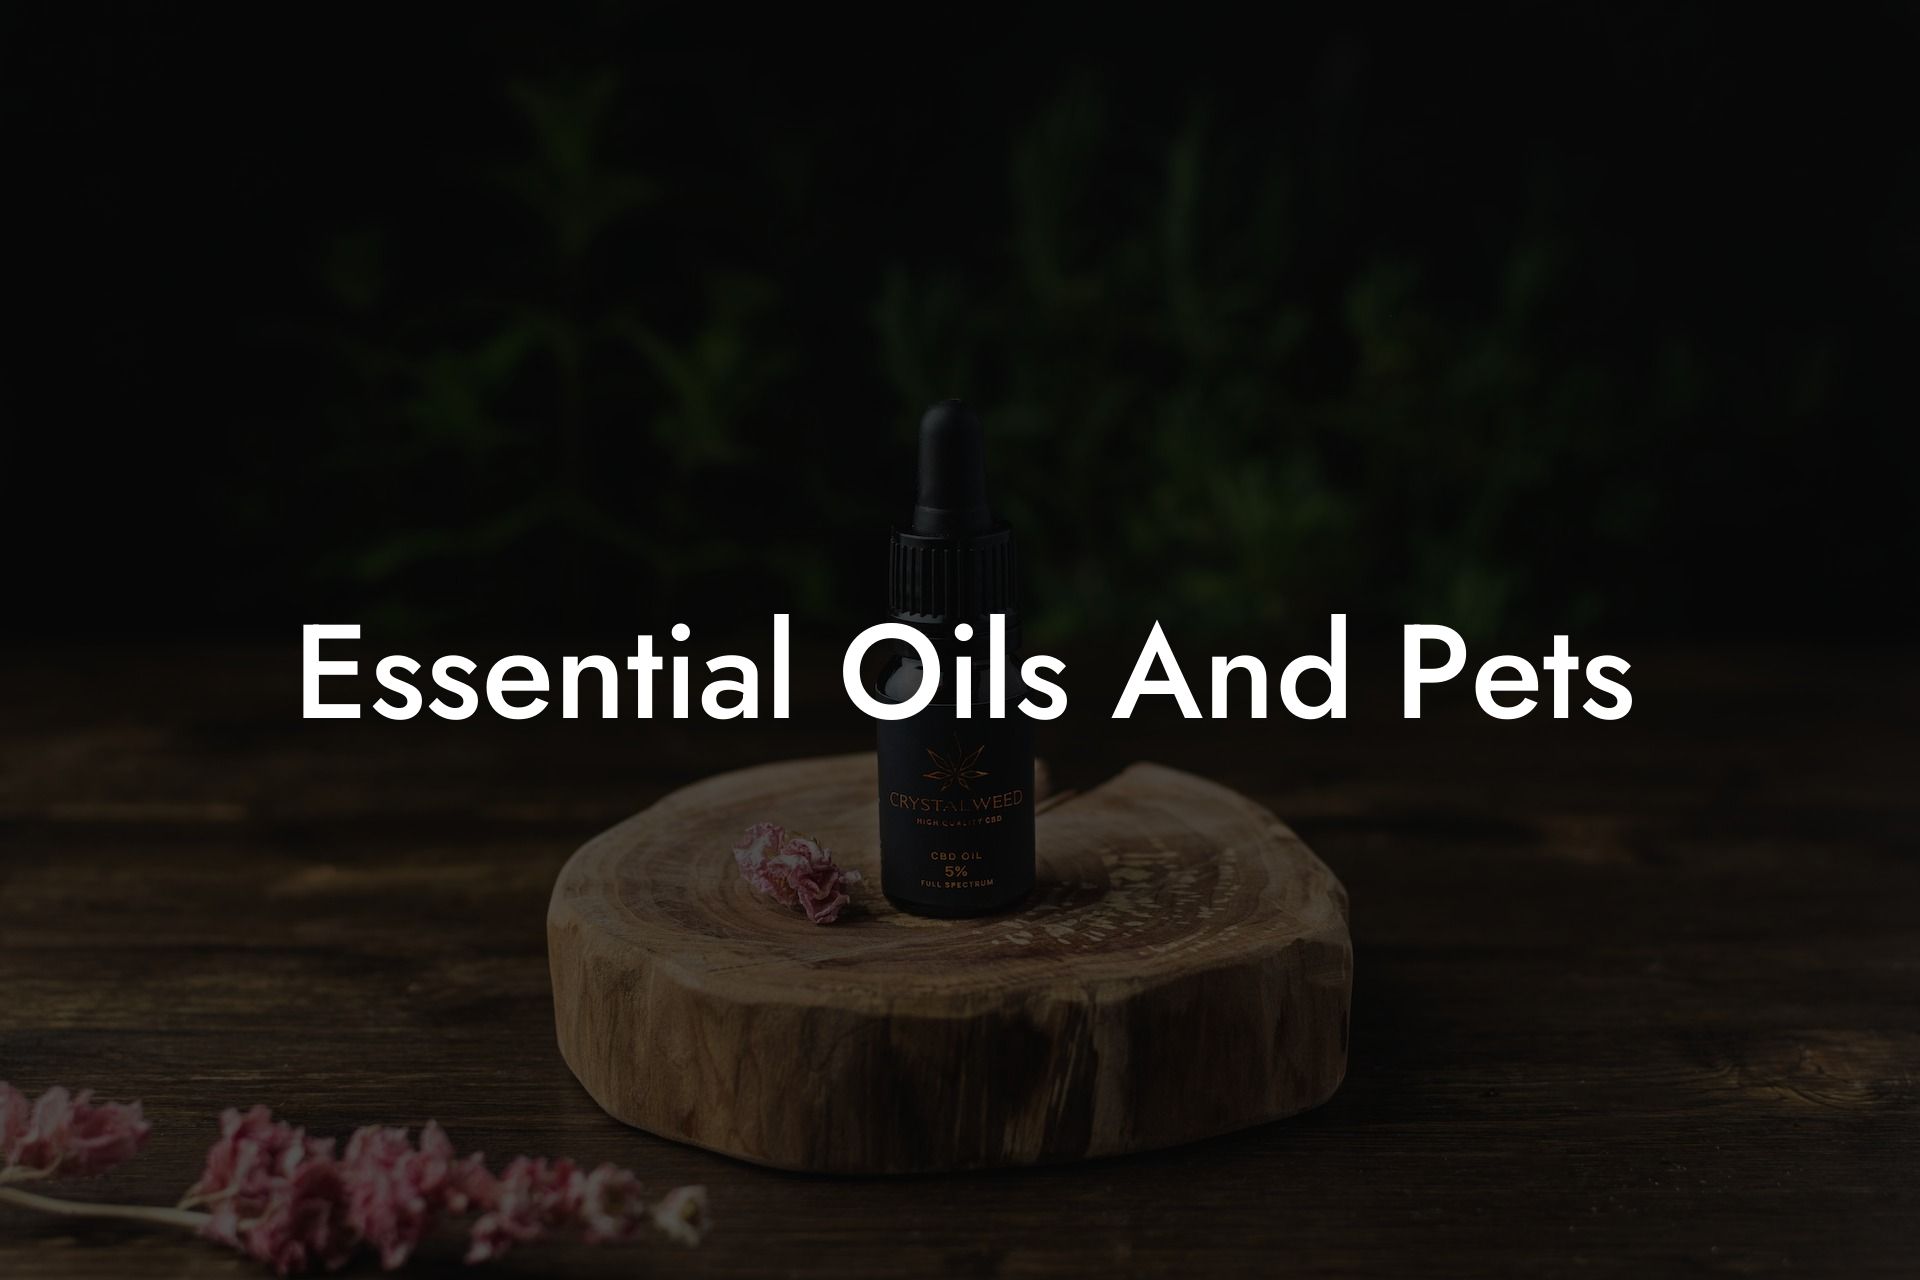 Essential Oils And Pets